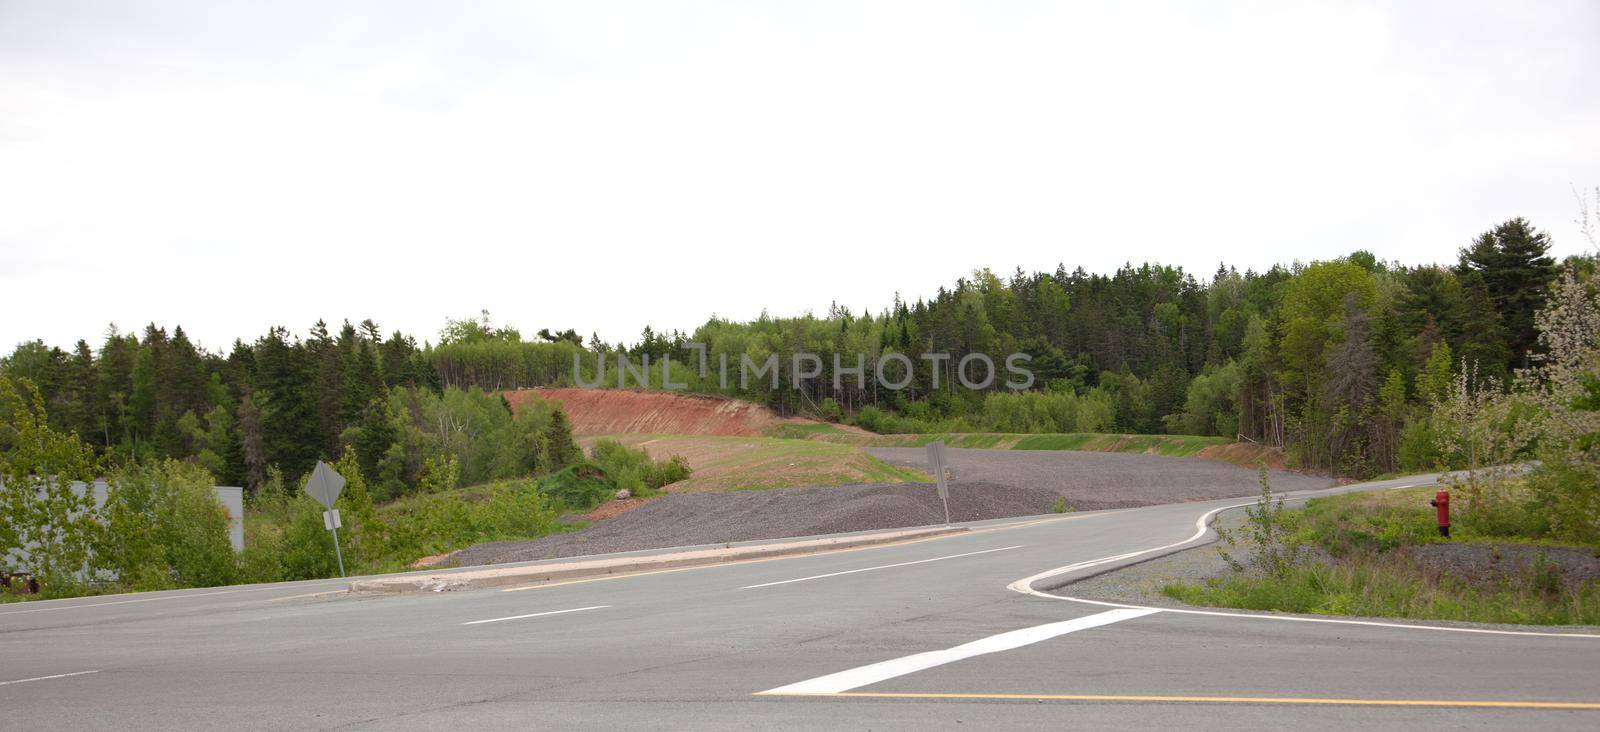  In the village of New Minas, Nova Scotia, construction on Granite Drive leads up to the new on and off exit to the 101 highway